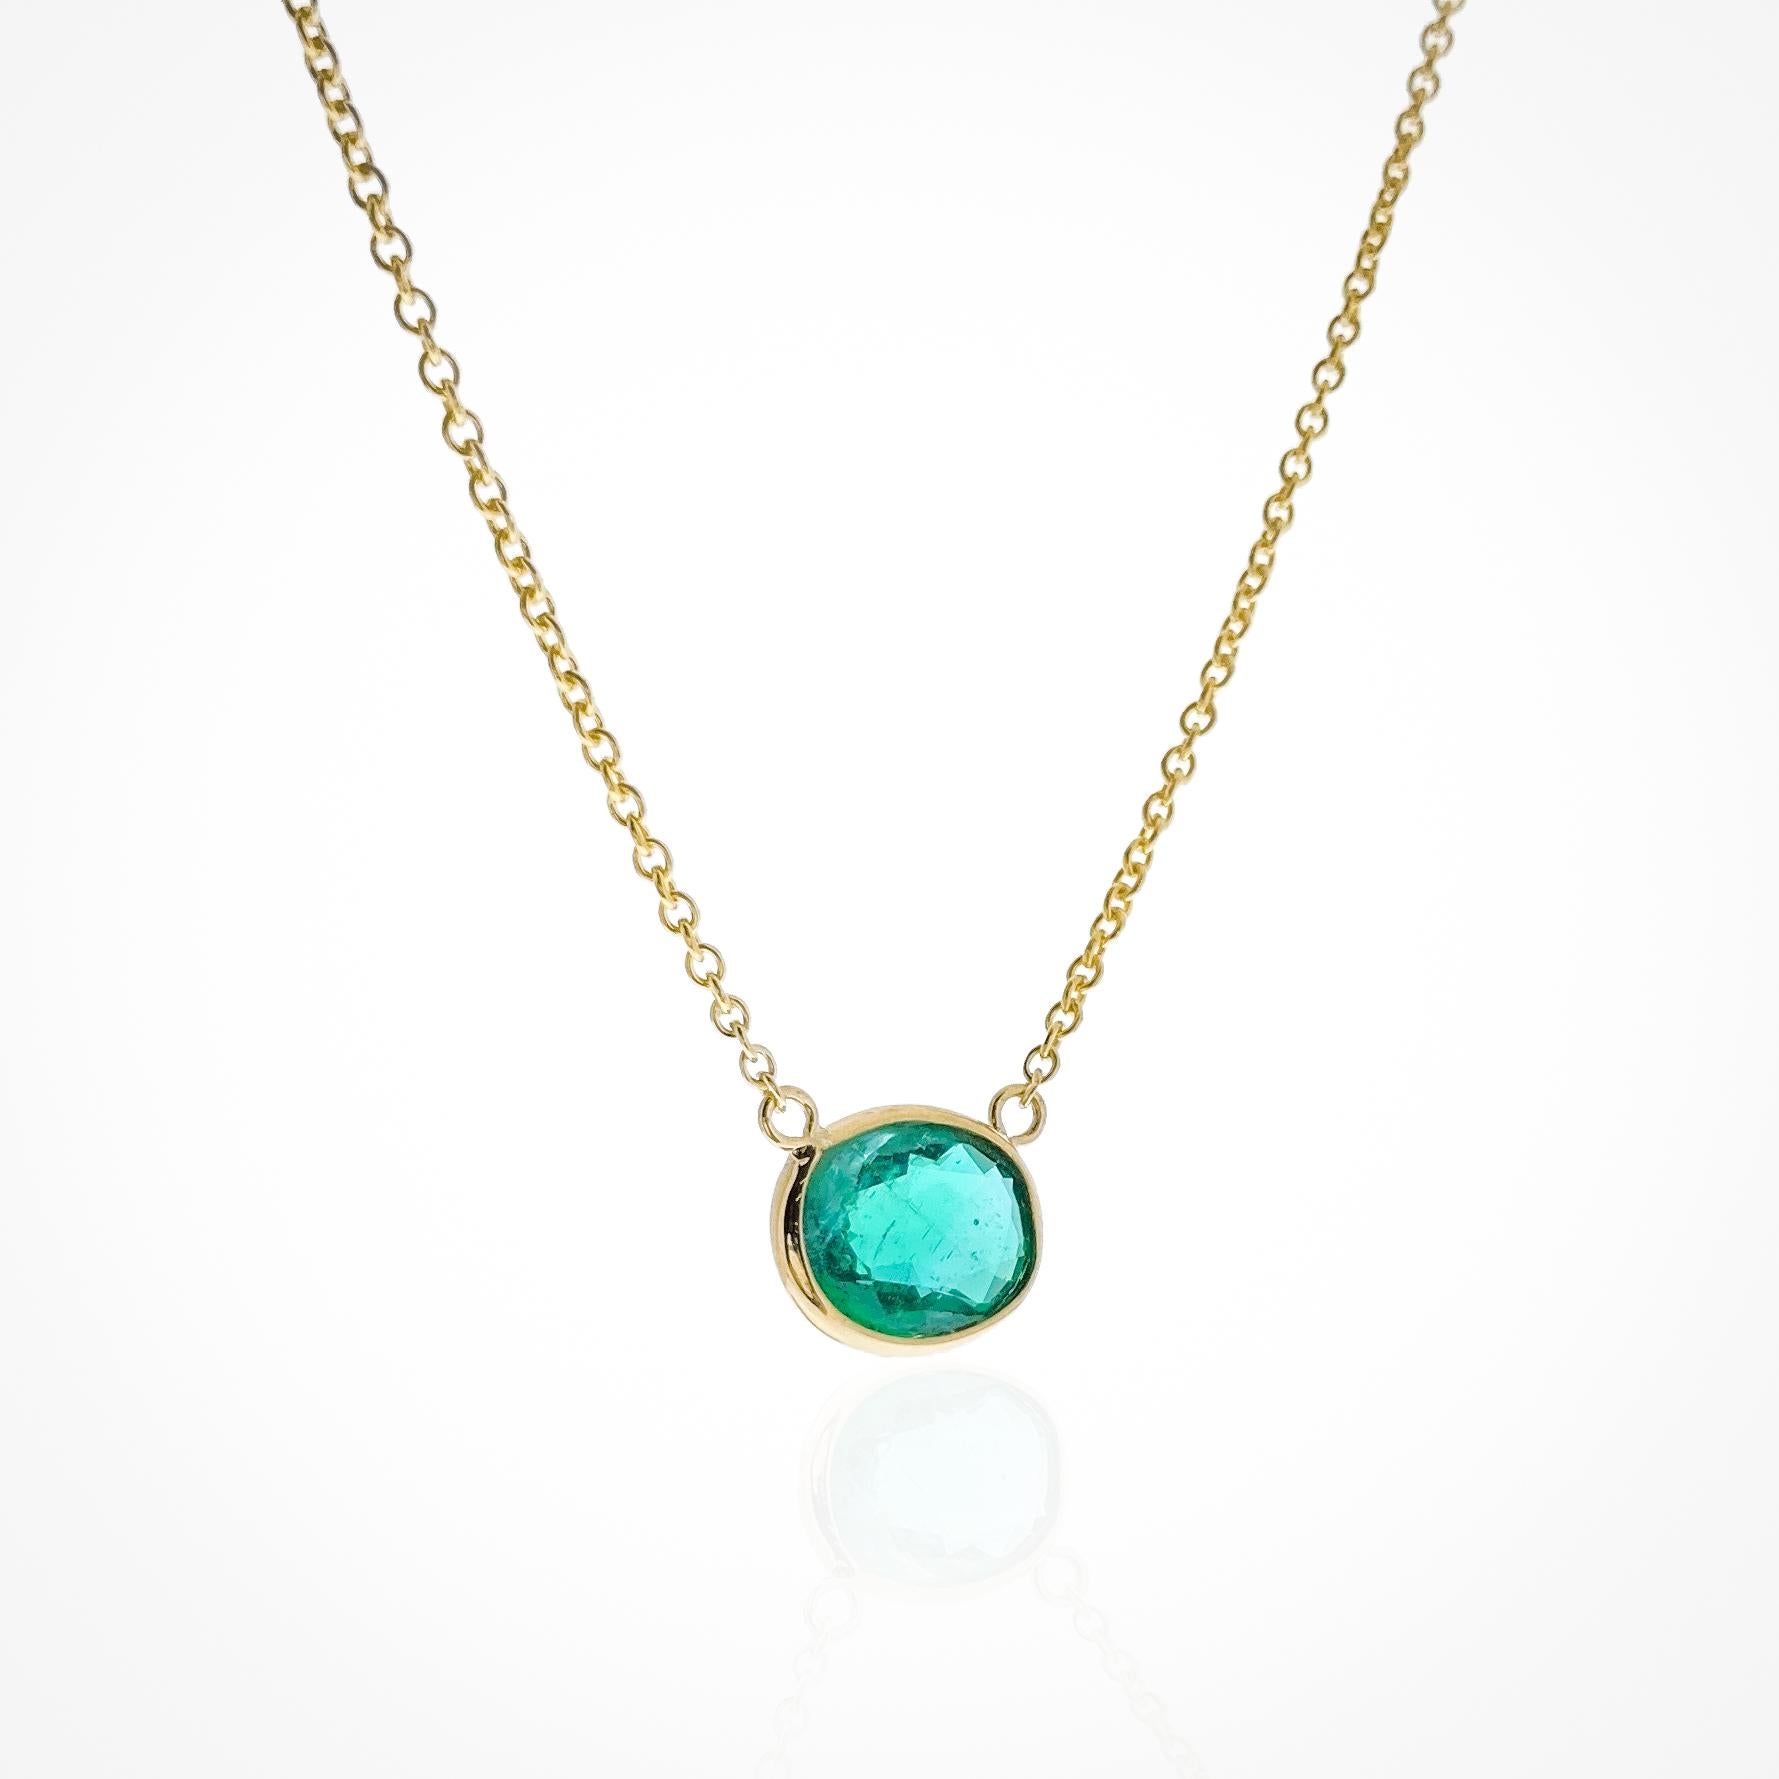 This necklace features an oval-cut green emerald with a weight of 1.41 carats, set in 14k yellow gold (YG). Emeralds are known for their rich green color, and the oval cut is a classic and timeless choice for gemstones, offering an elegant and